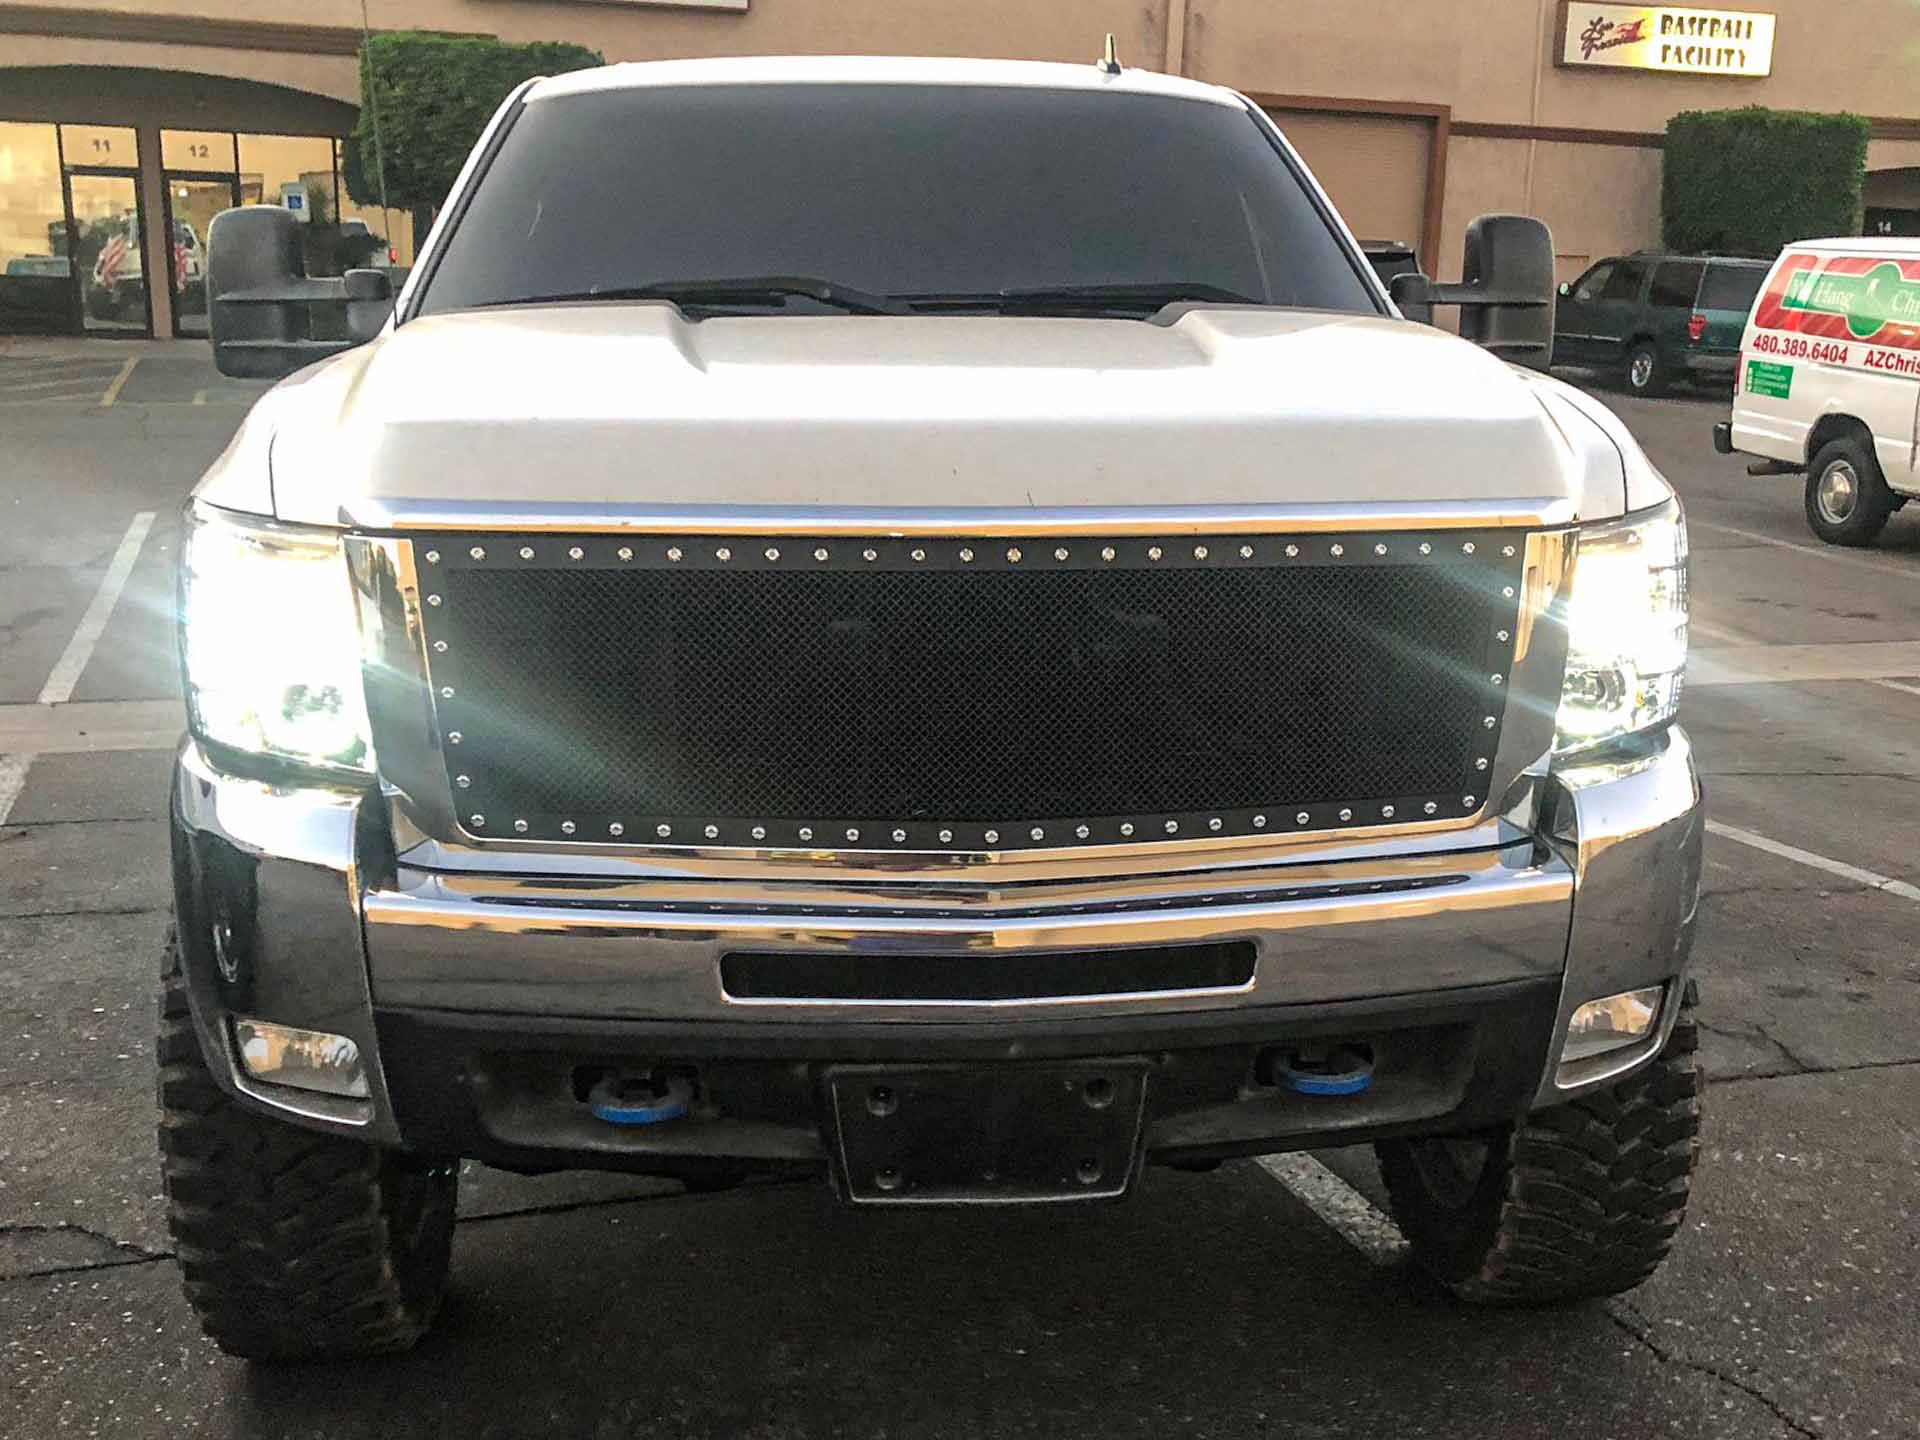 Stewarts Silverado grill and lights from front